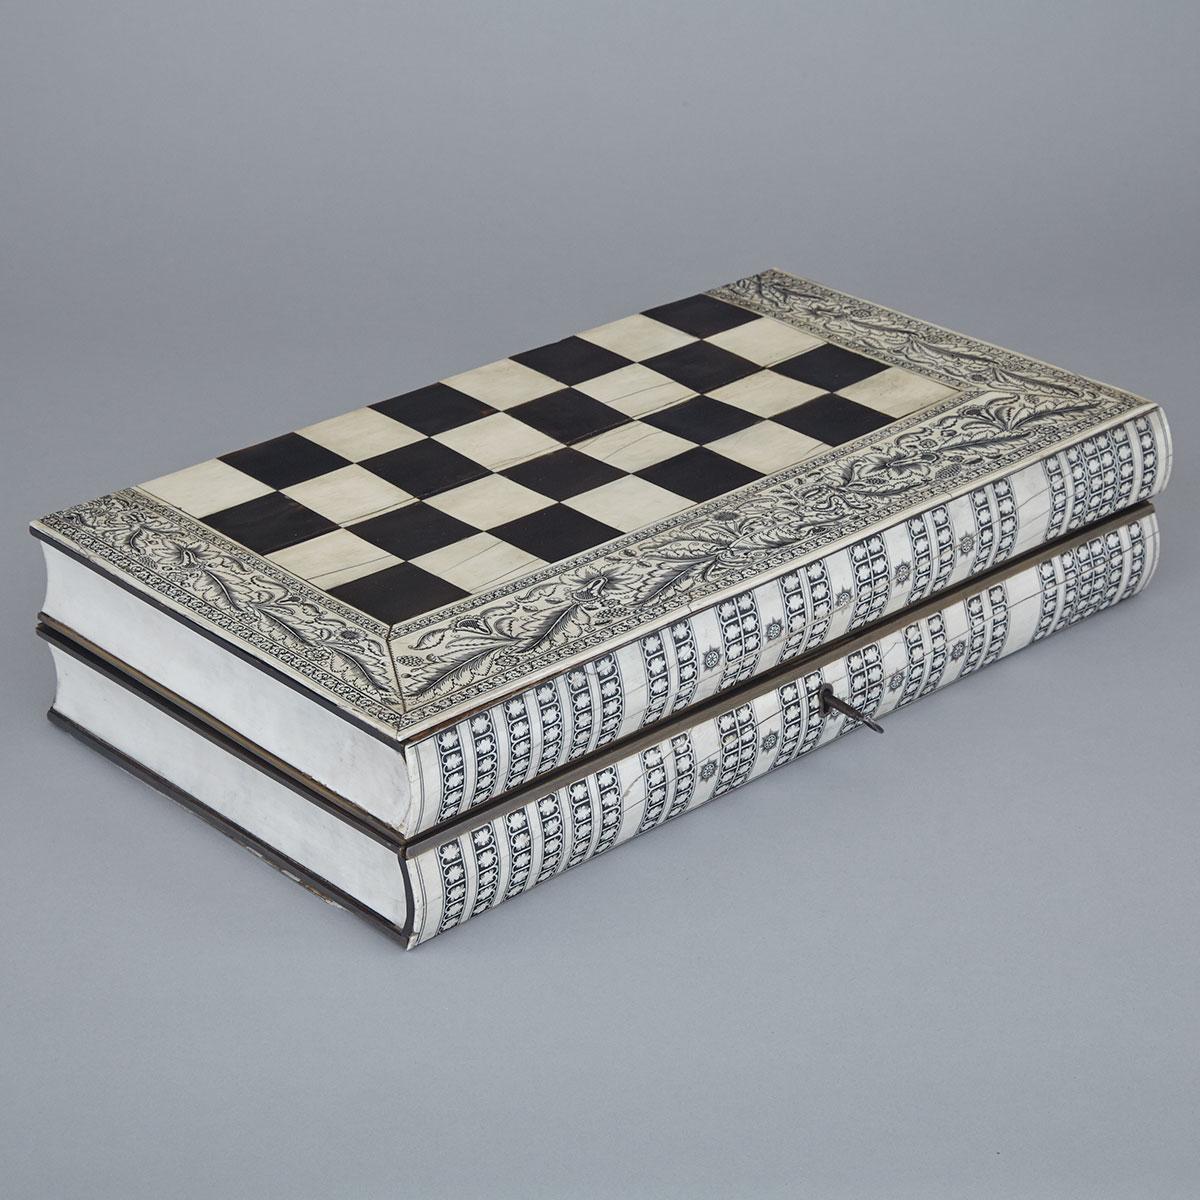 Anglo-Indian Ivory and Horn Inlaid Sandalwood Book Form Game Board, Vizagapatam, mid 19th century